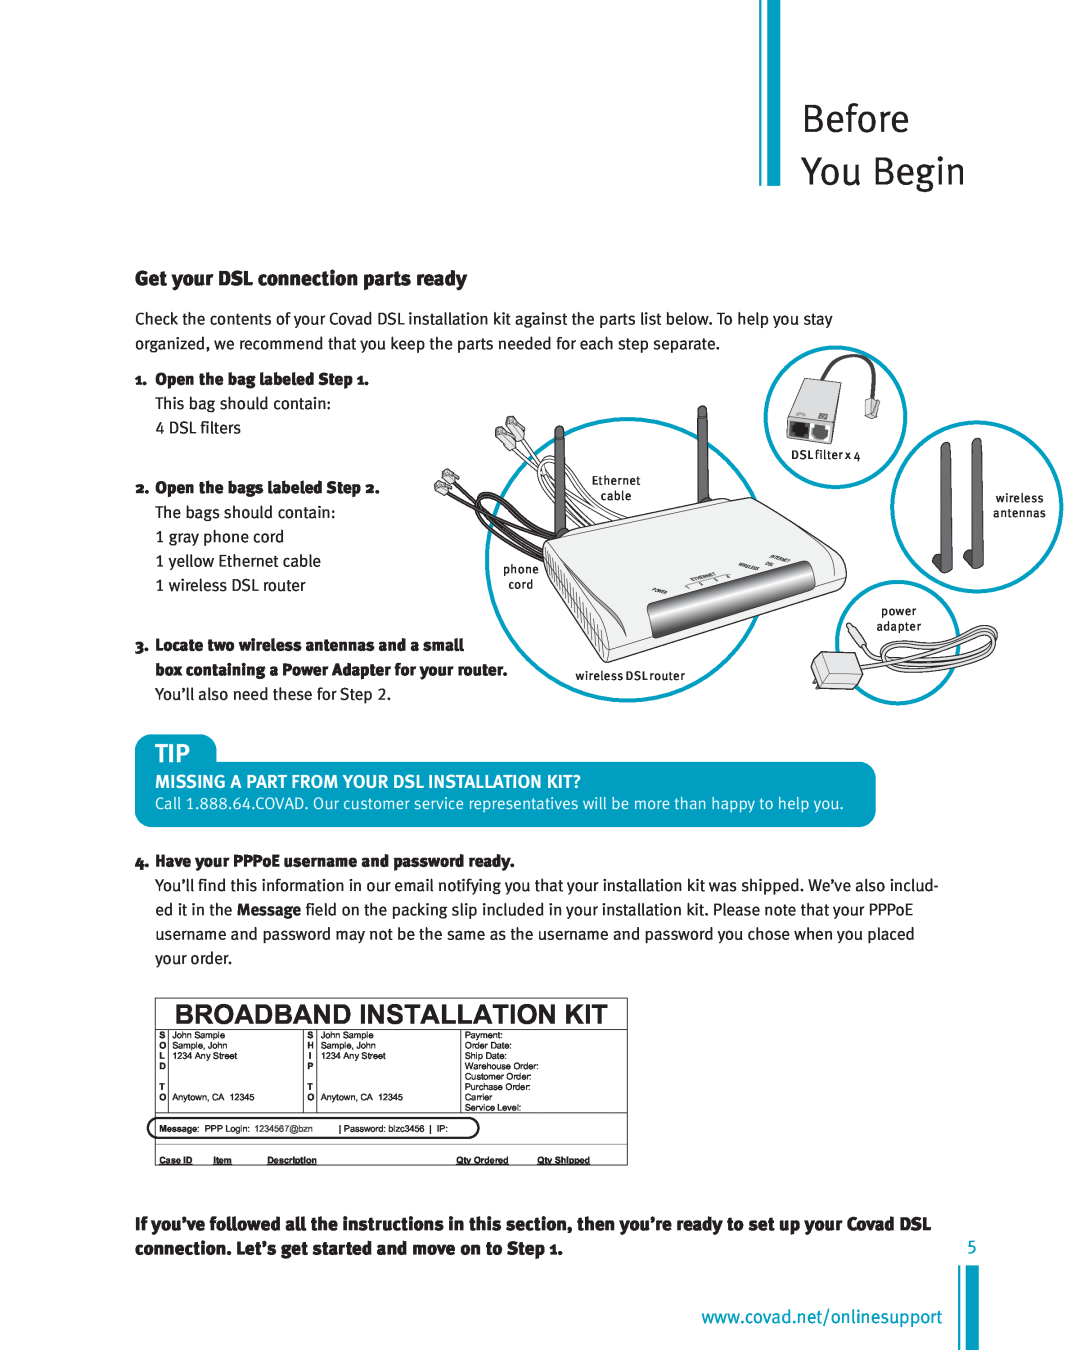 Netopia Network Adapte manual Before You Begin, Broadband Installation Kit, Get your DSL connection parts ready 